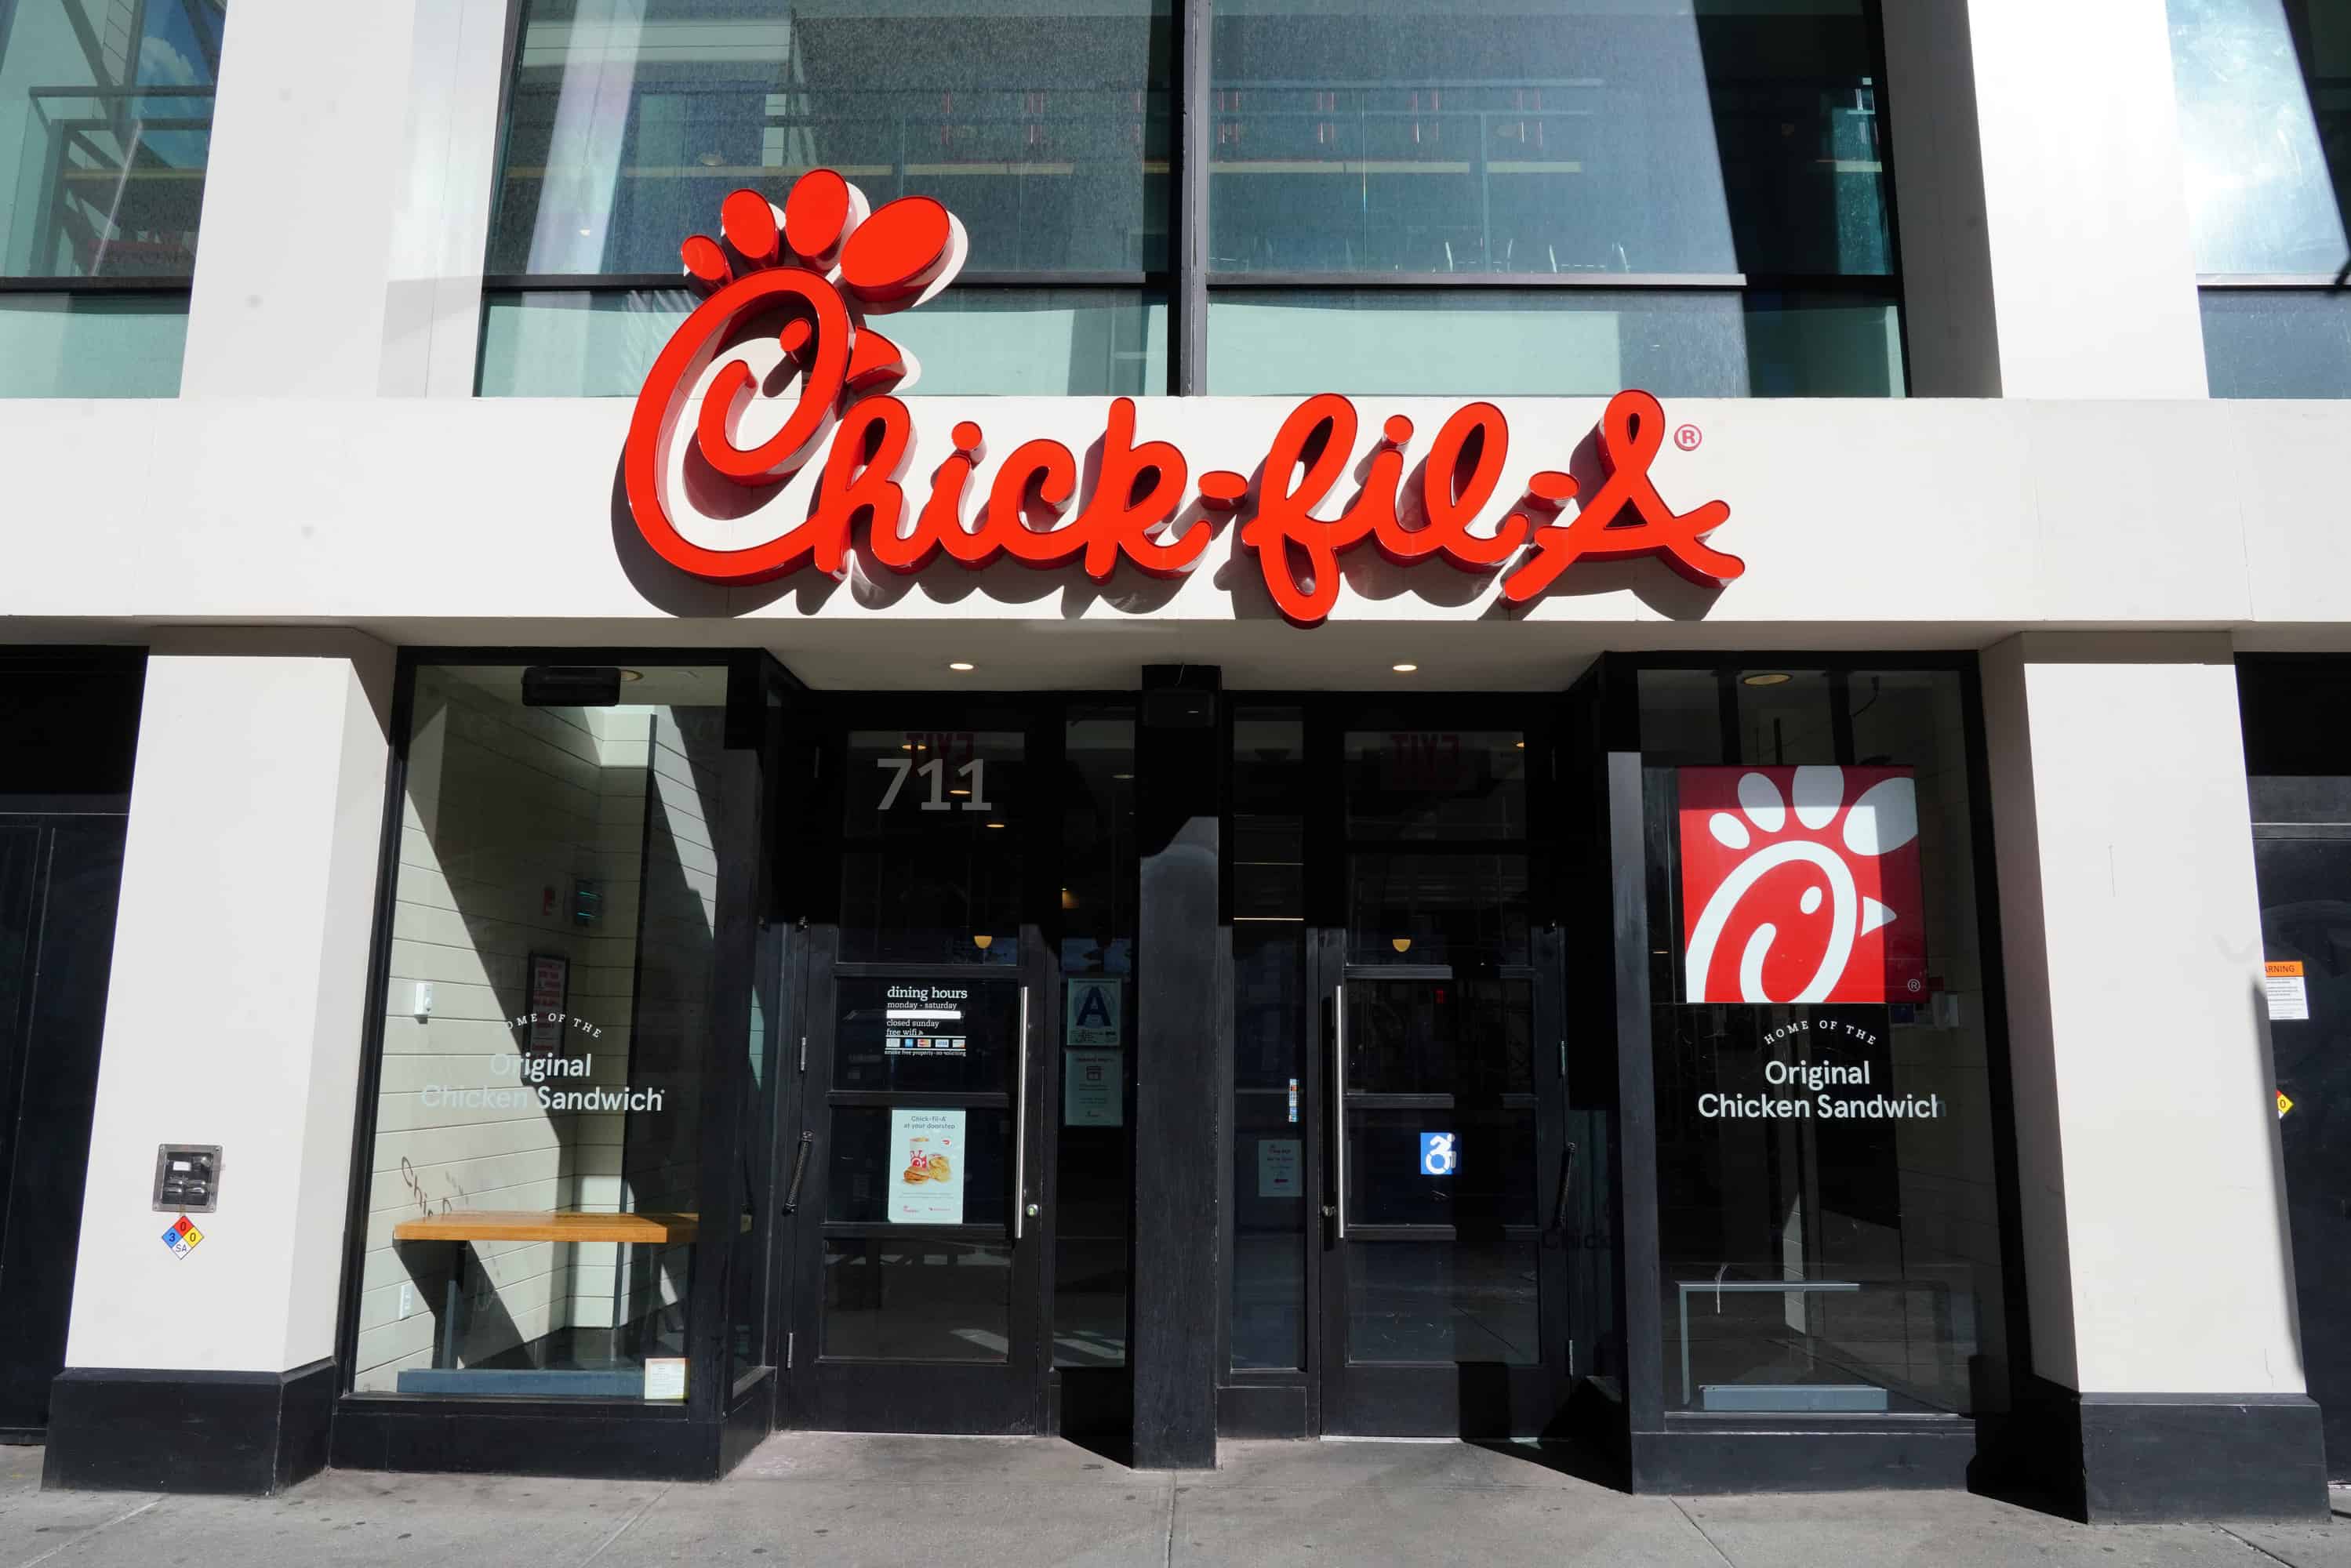 Chick-Fil-A To Give Only One Dipping Sauce Per Item Due To Supply Shortage